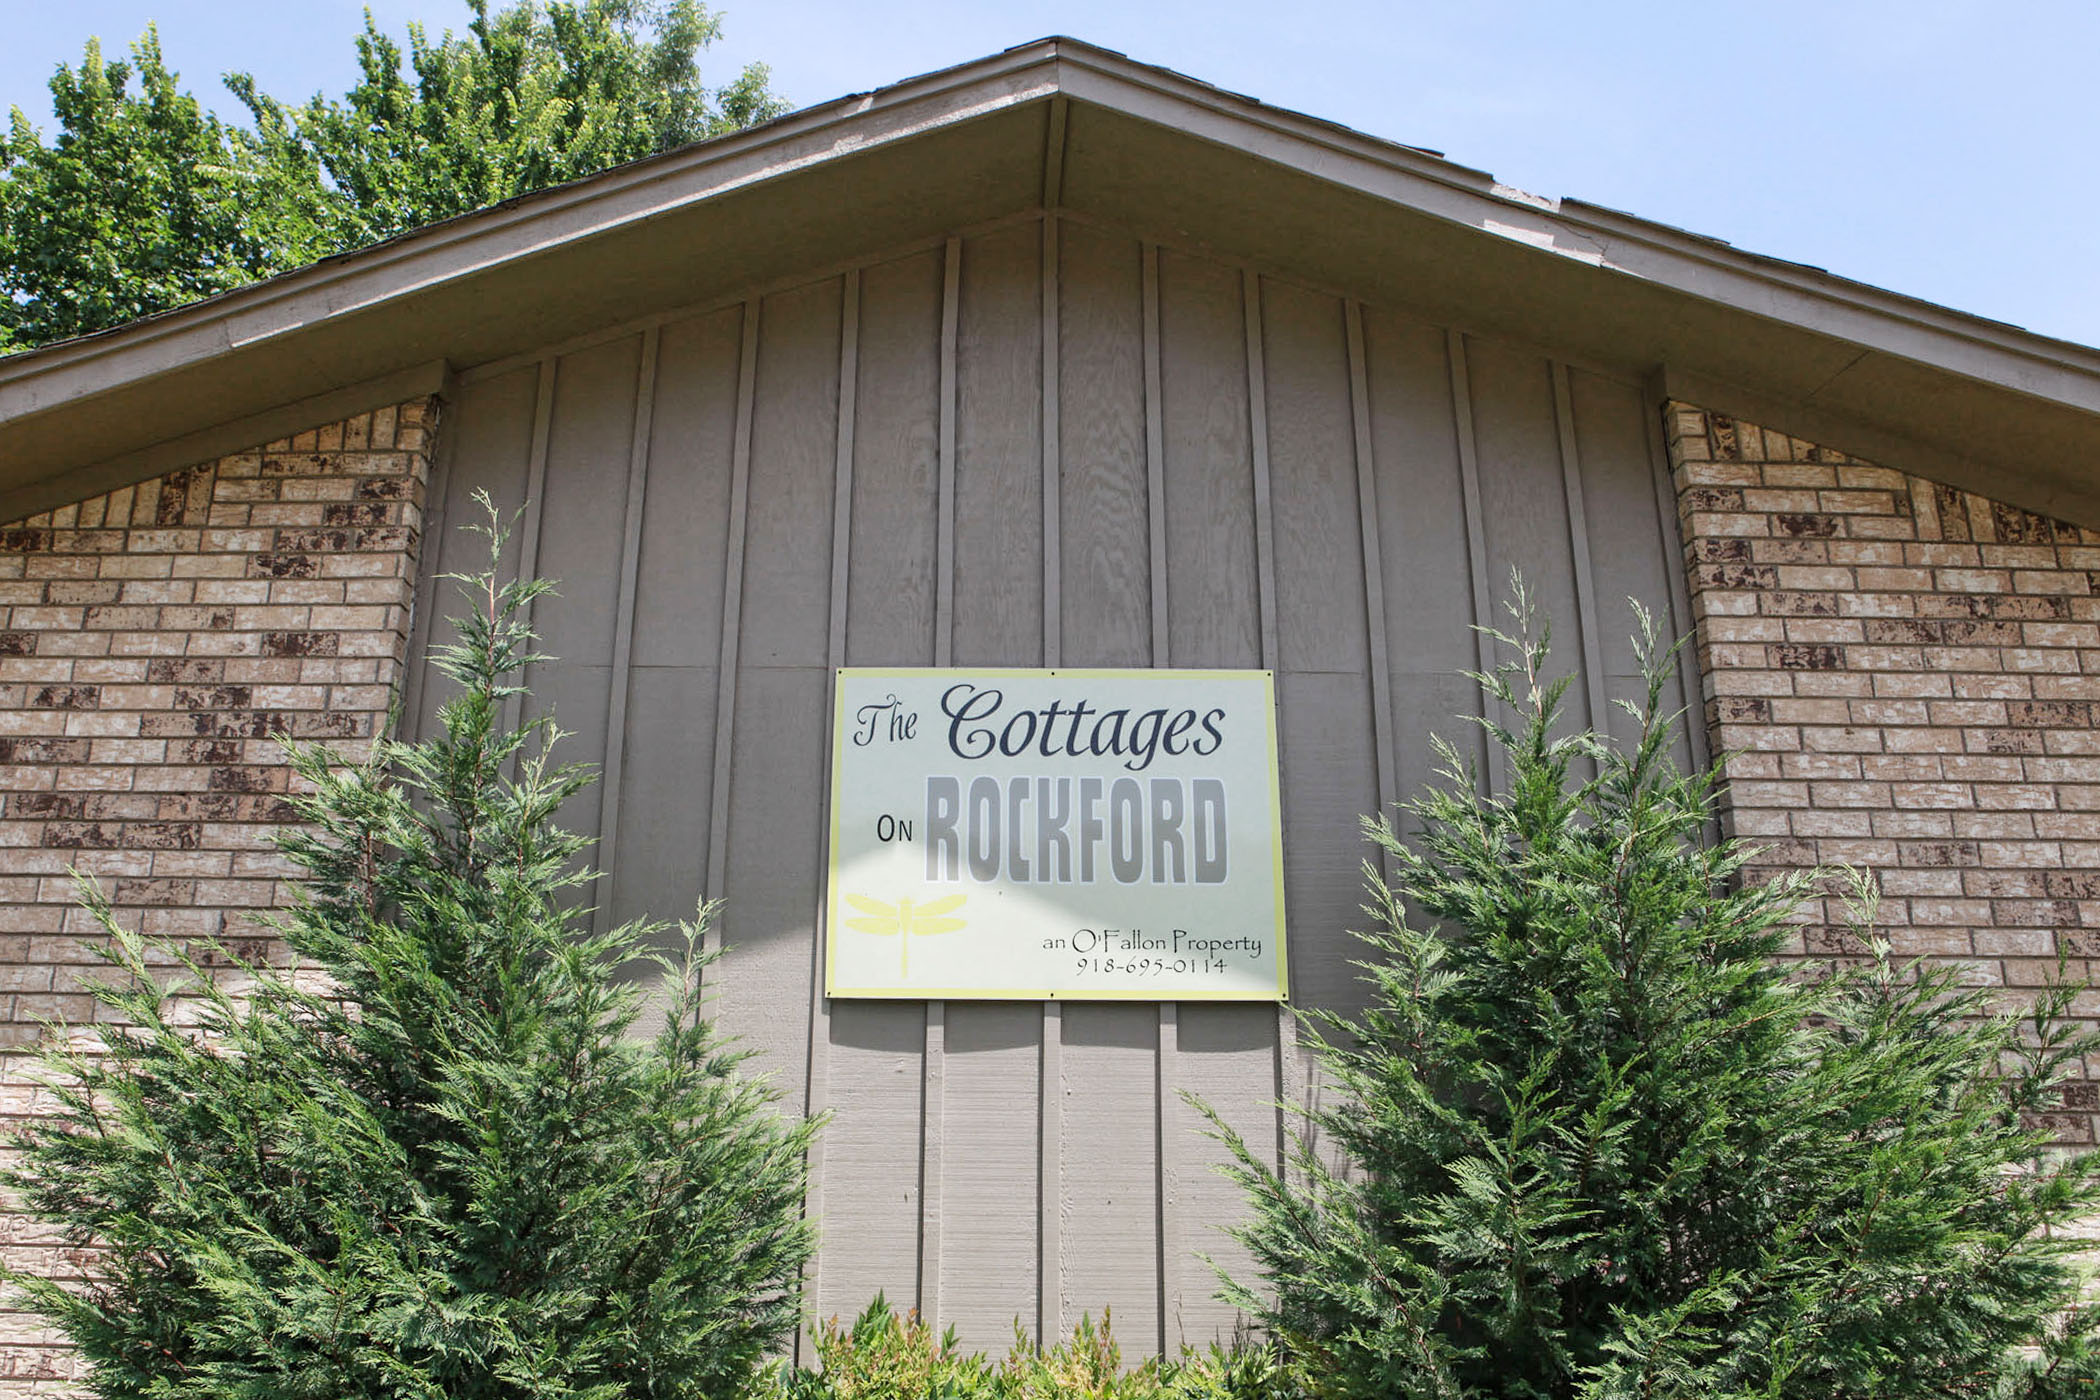 Cottages On Rockford Forest Orchard Tulsa Apartments O Fallon